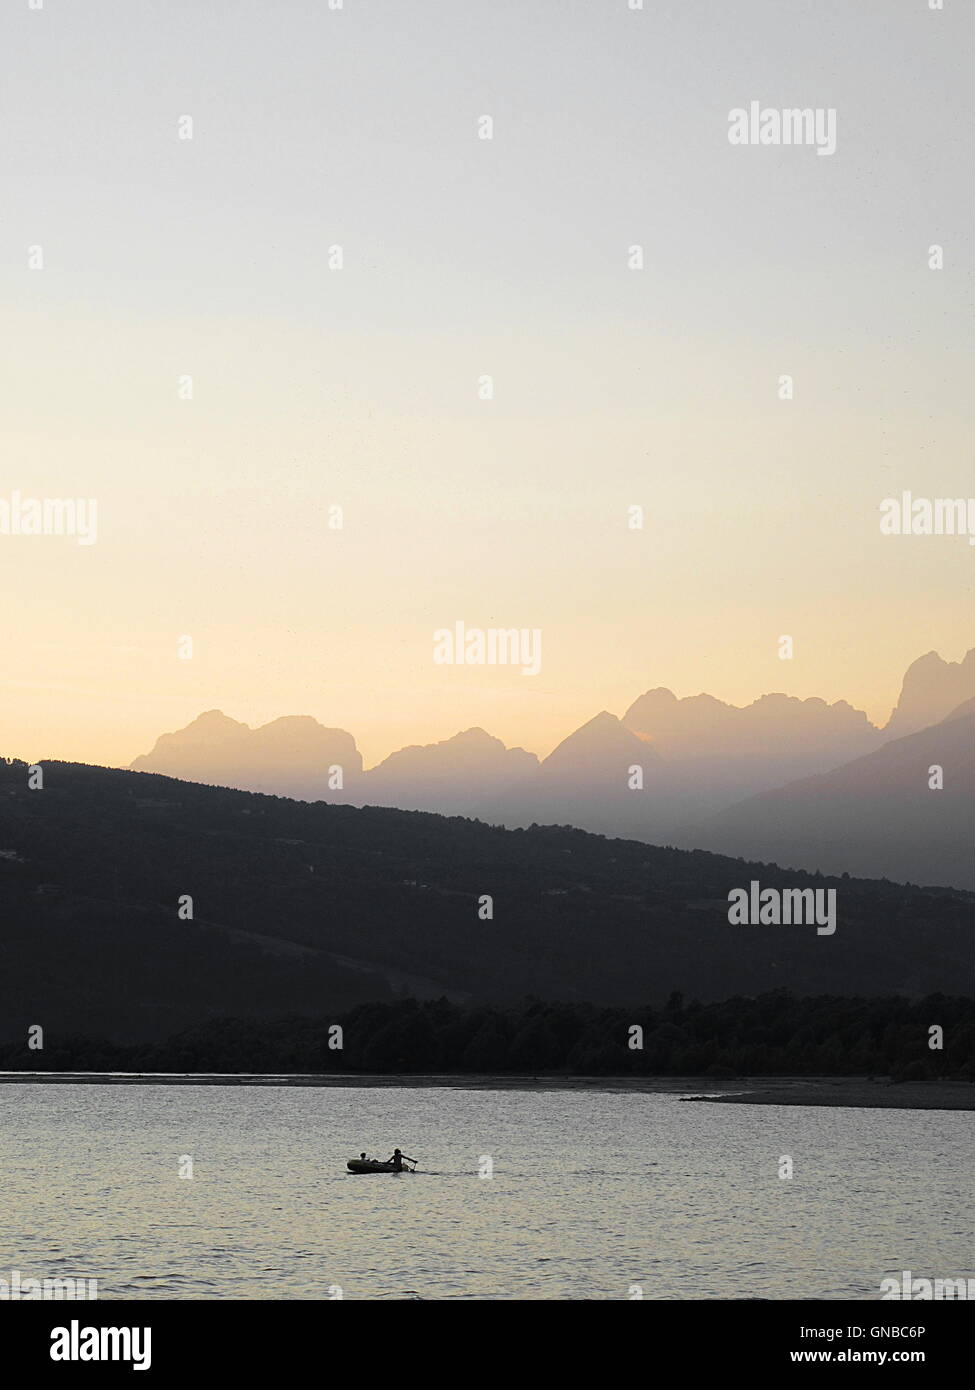 Full frame shot of sunset landscape with mountain, lake, forest and a small fishing boat Stock Photo